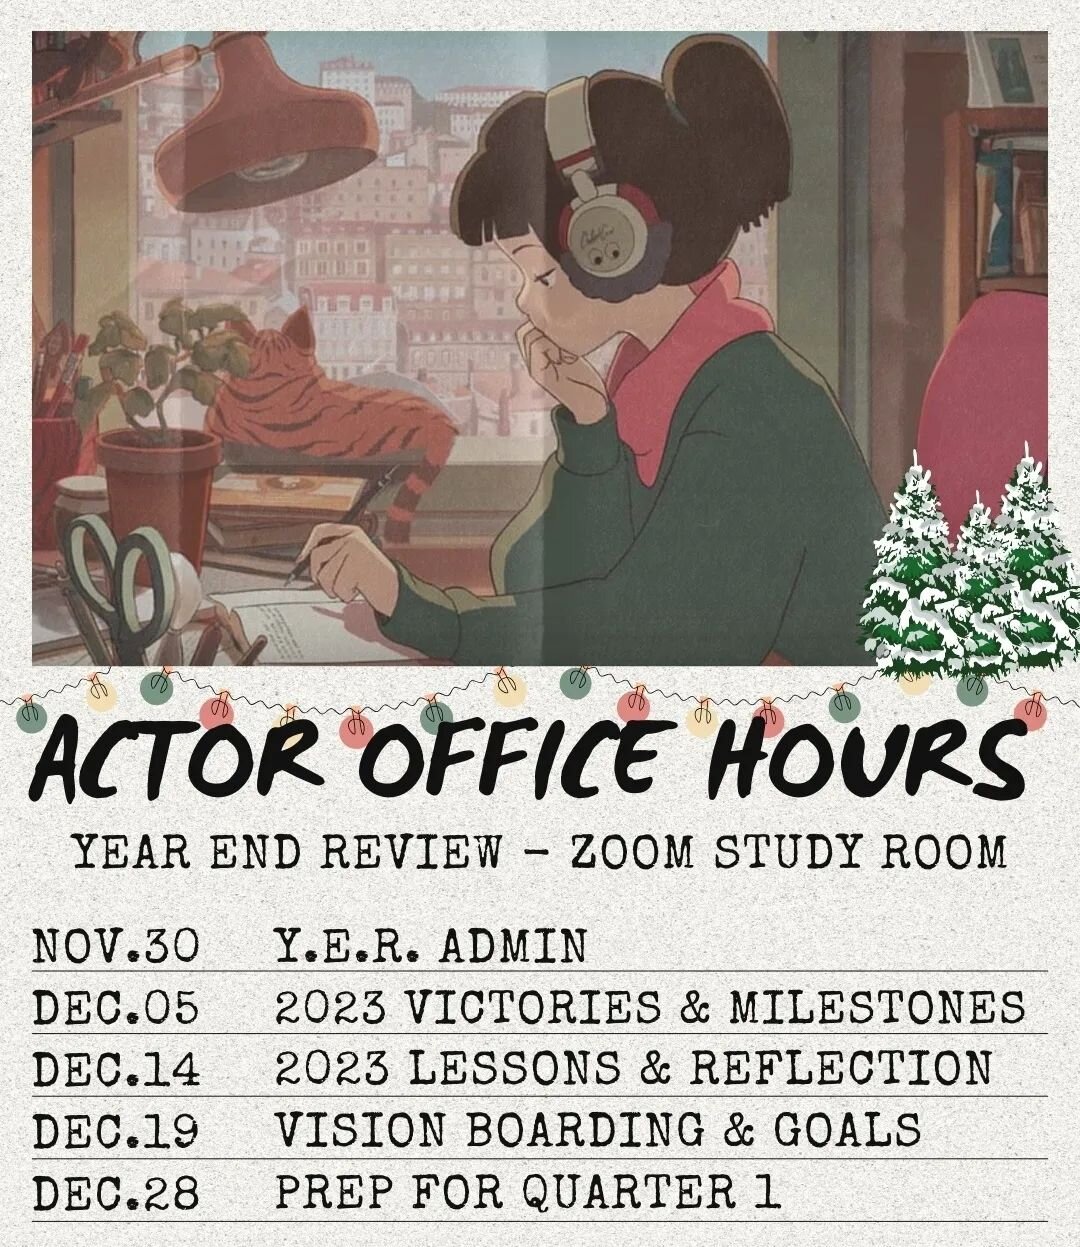 Actor Office Hours are open and free for xmas!

As I am closing out the year, and busier than anticipated, I figured a gathering might be in order for more accountability buds.

Time : 5 - 7 pm GMT
Price : a smile
Link : available upon request

These